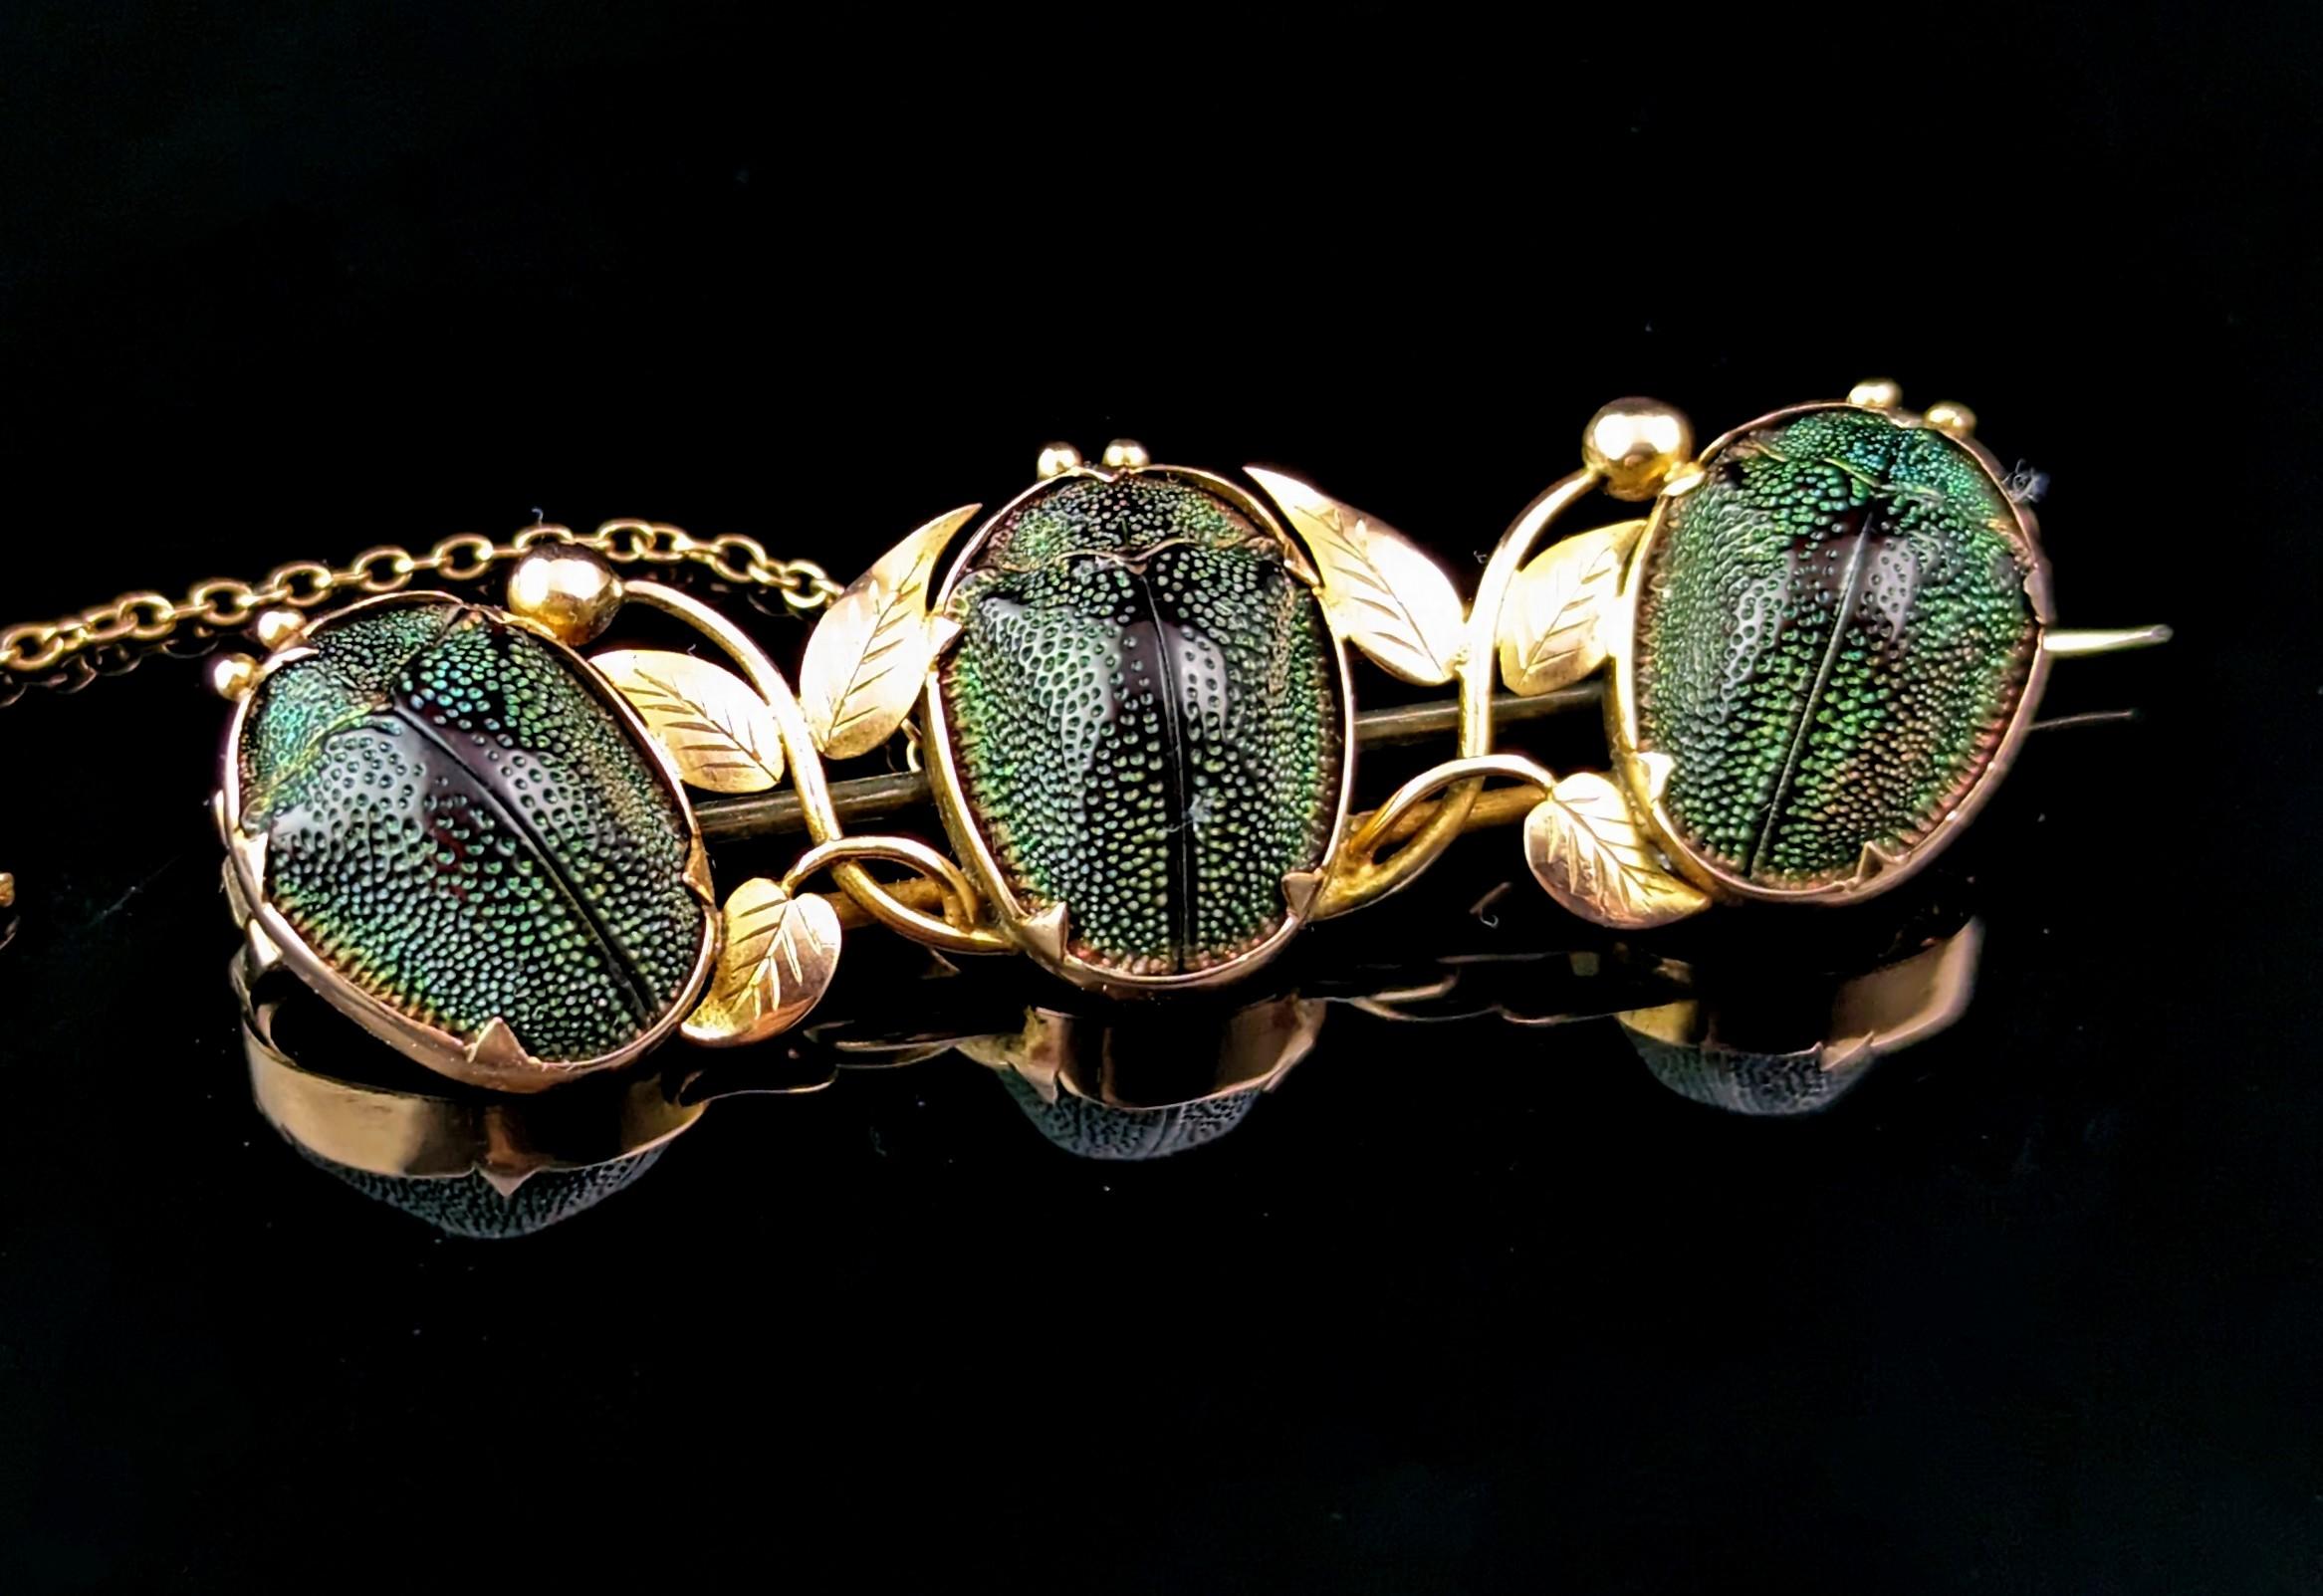 The insect jewellery of the Victorian and Edwardian eras is always popular, like this gorgeous antique, Egyptian revival, 9ct gold and triple scarab beetle brooch.

This piece is a particularly fine example, it features three real scarab beetles,